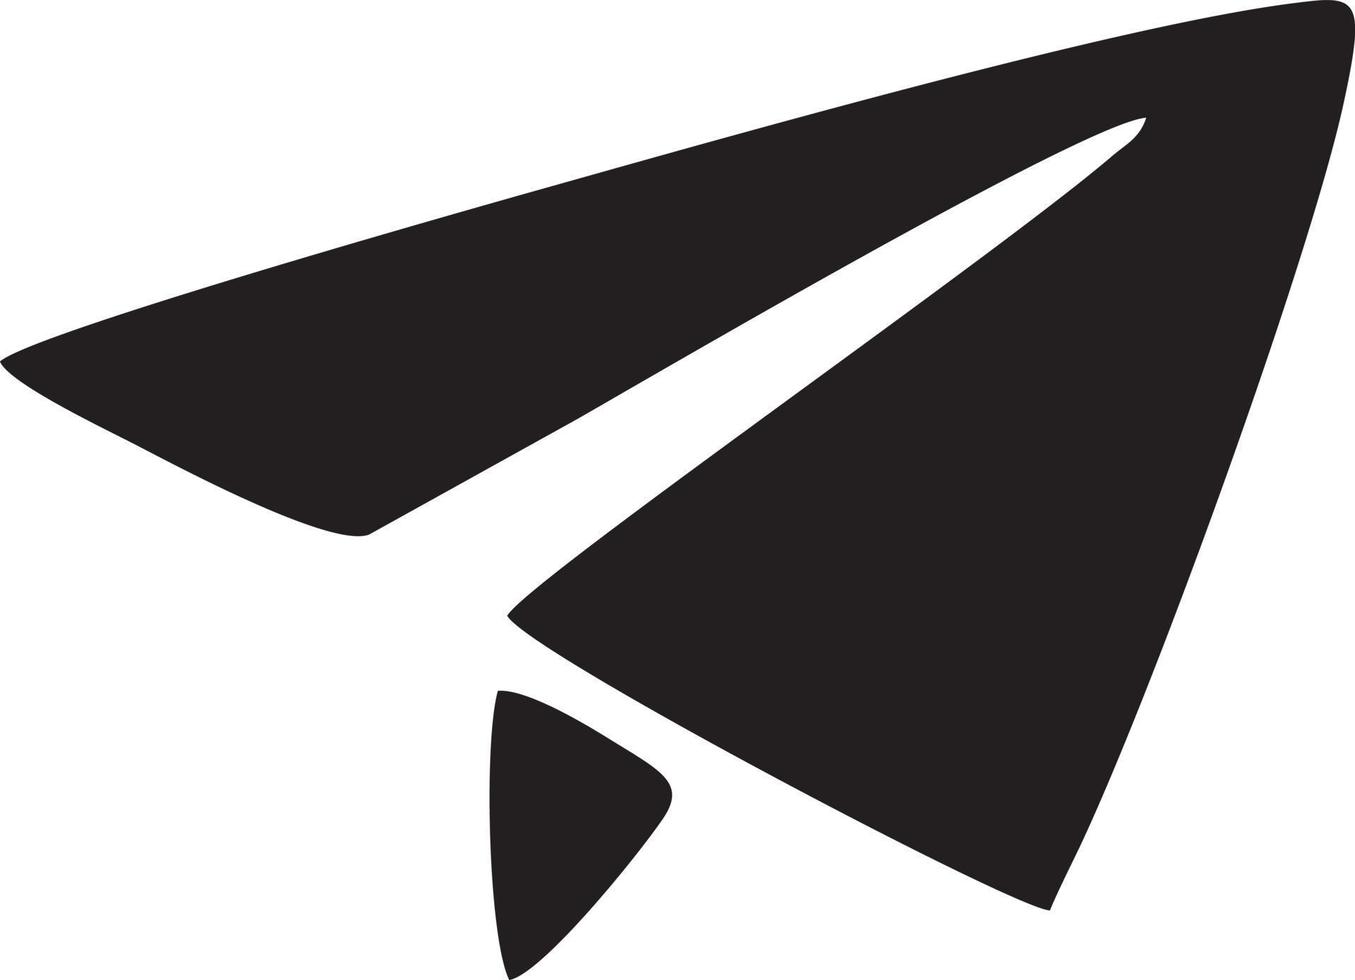 Paper plane icon symbol image vector, illustration of the flight aviation in black image. EPS 10 vector